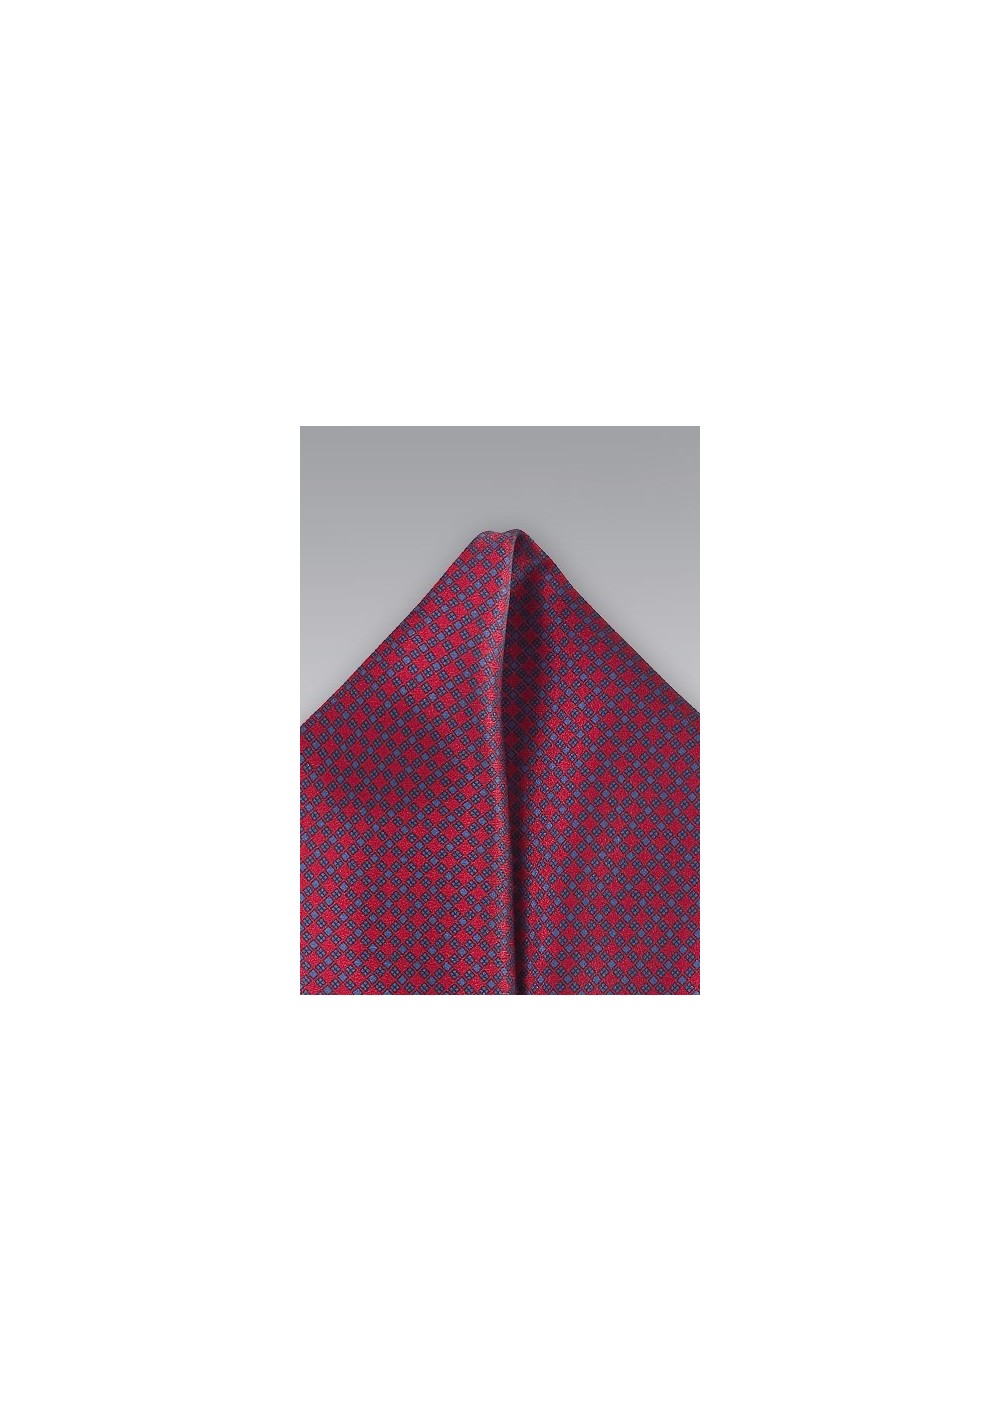 Wine Red and Blue Silk Pocket Square